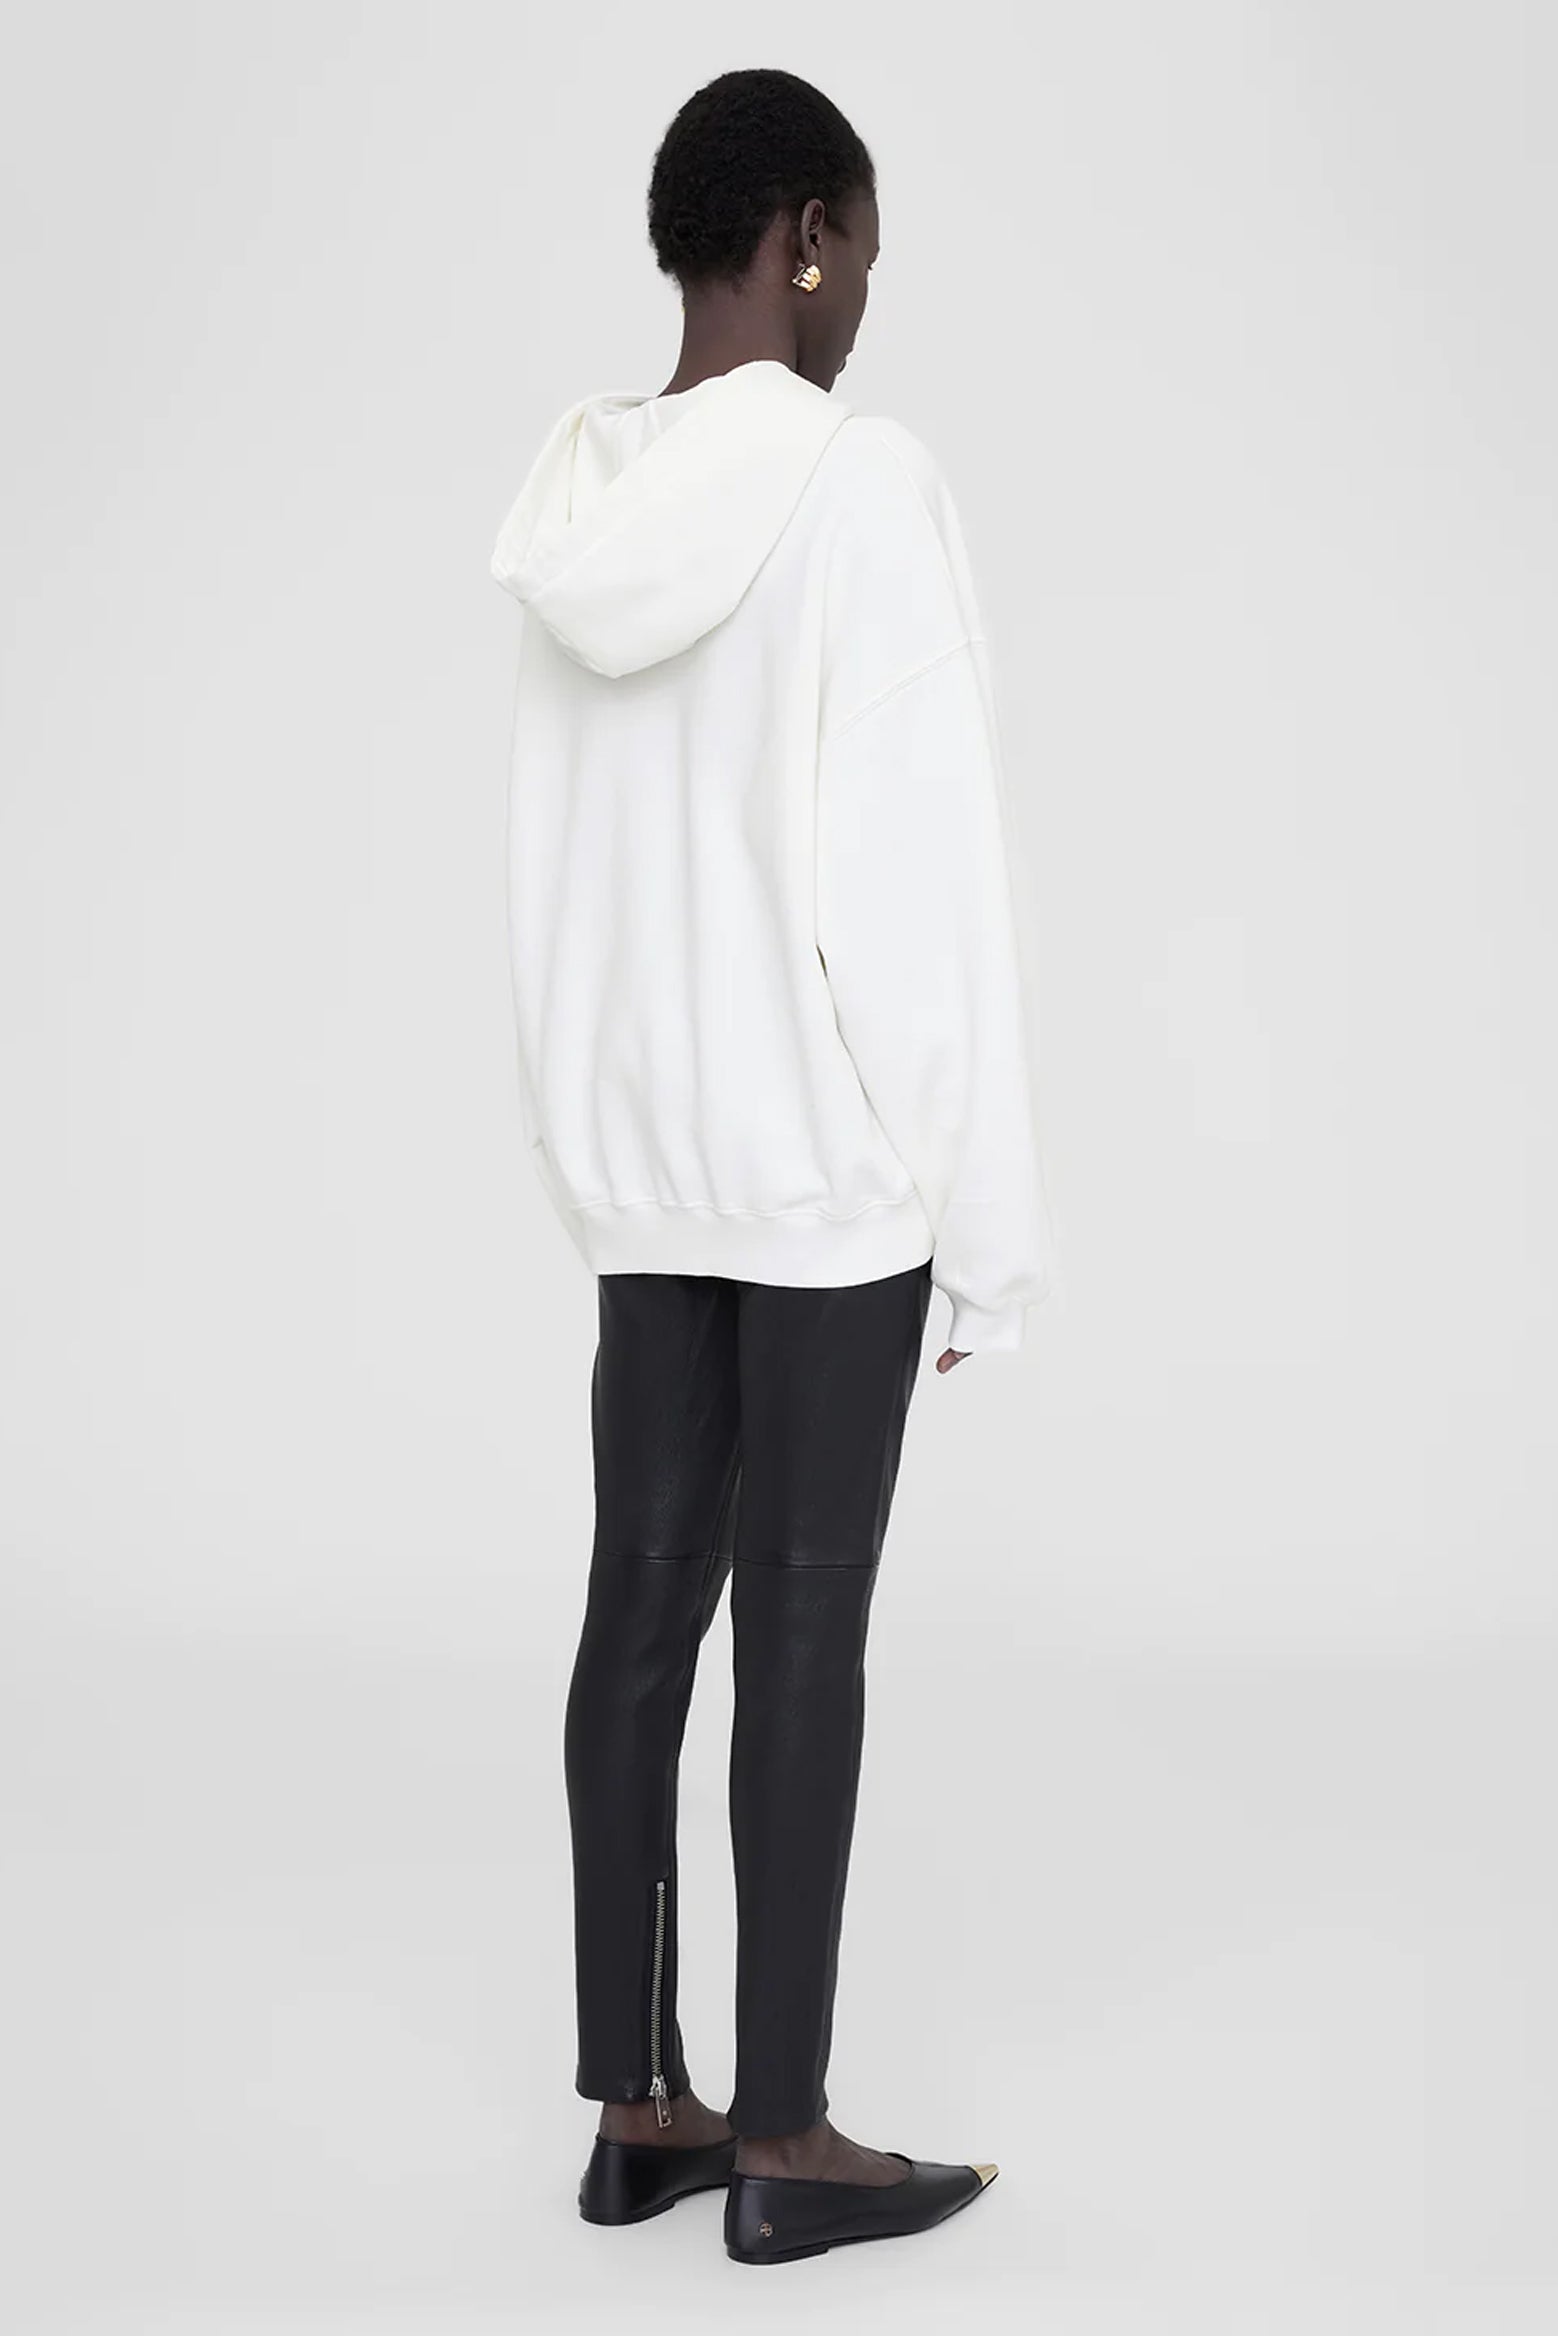 Anine Bing Harvey Sweatshirt in Ivory and Dark Sage available at The New Trend Australia.